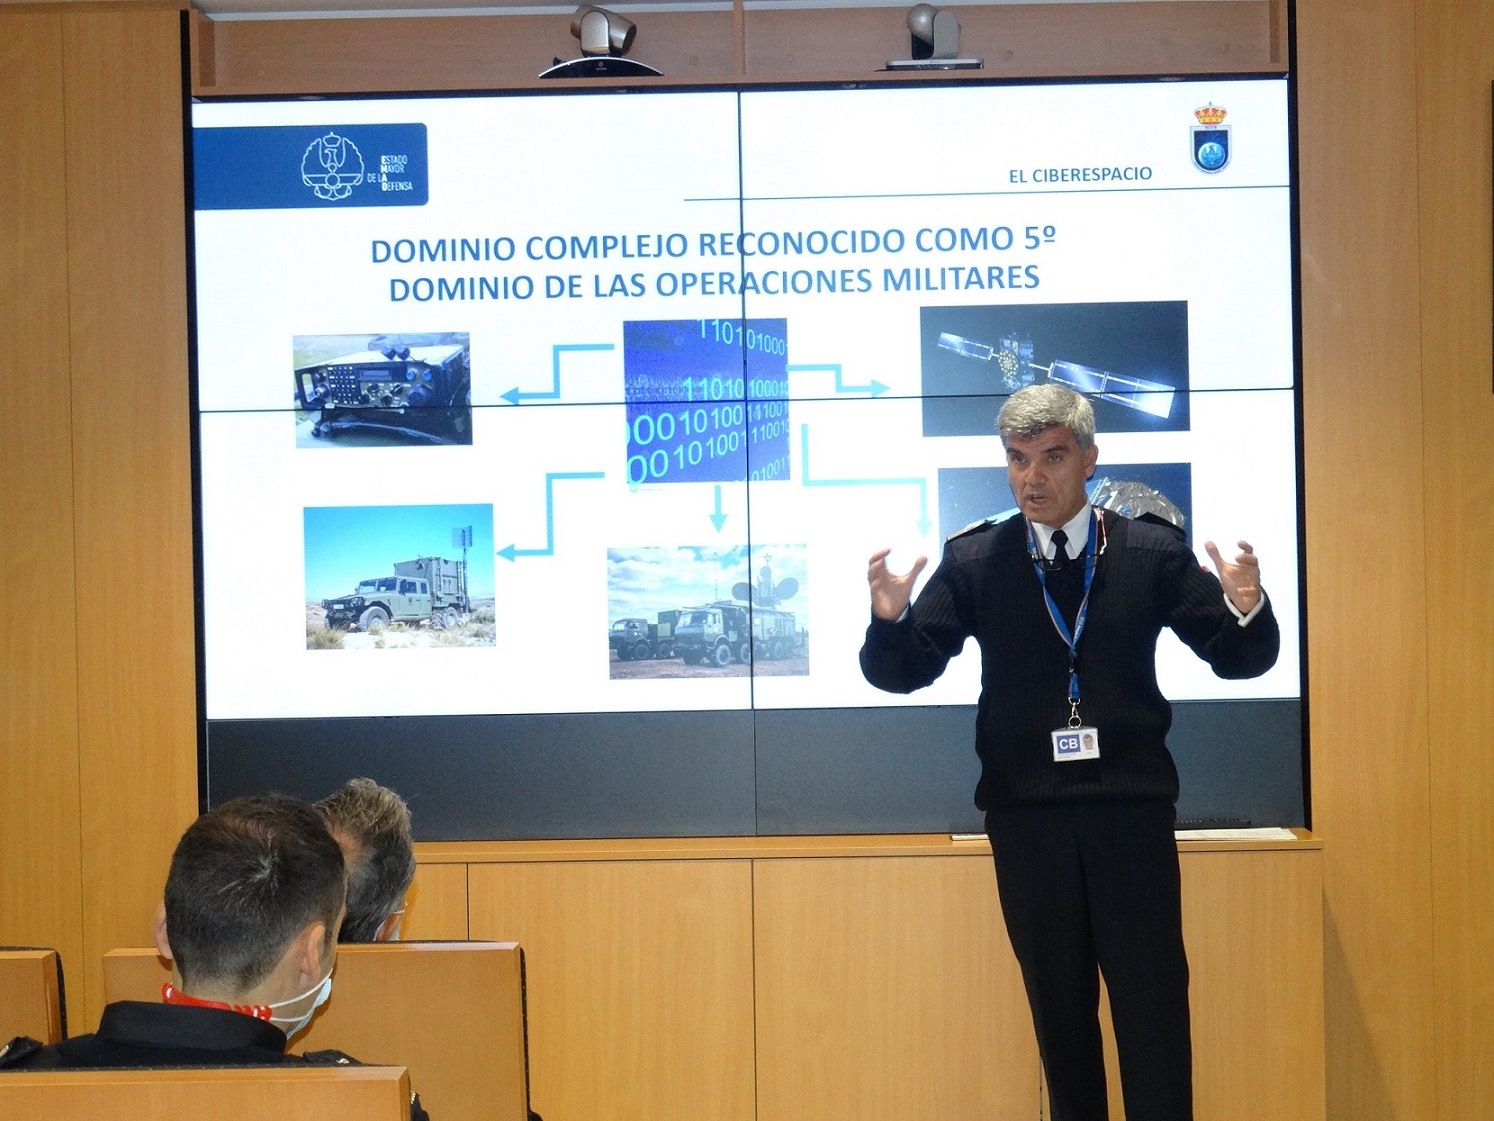 The second commander-Deputy commander- of the Joint Cyberspace Command (MCCE in Spanish) during his speech